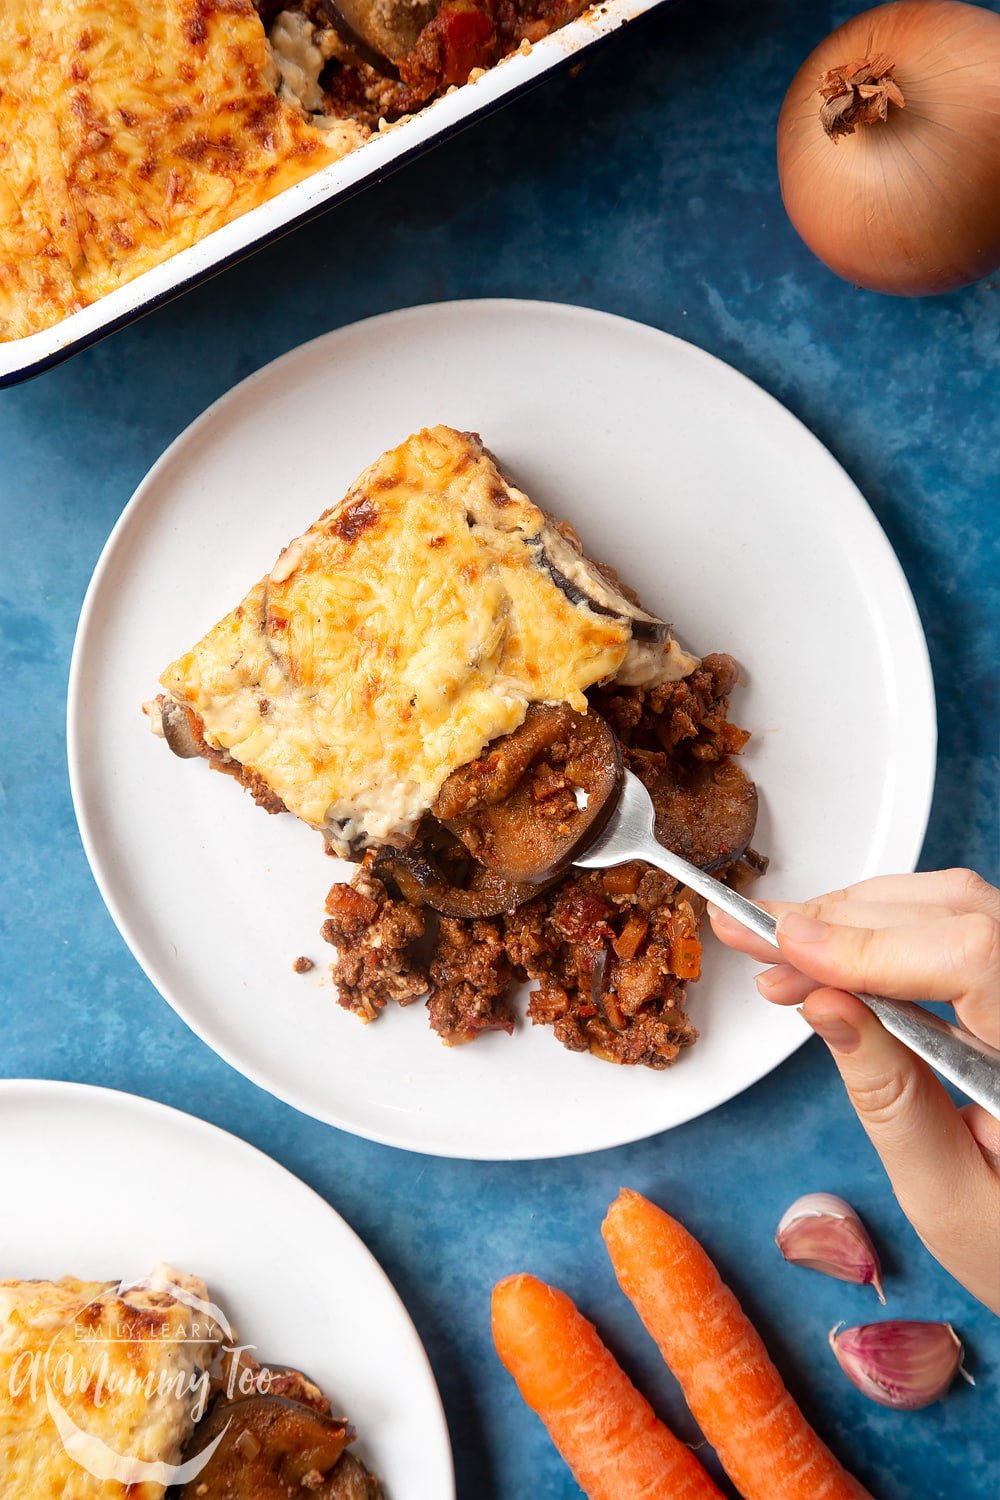 Overhead shot of a hand holding a fork picking up an aubergine from Quorn Meat Free Mince Moussaka served on a white plate